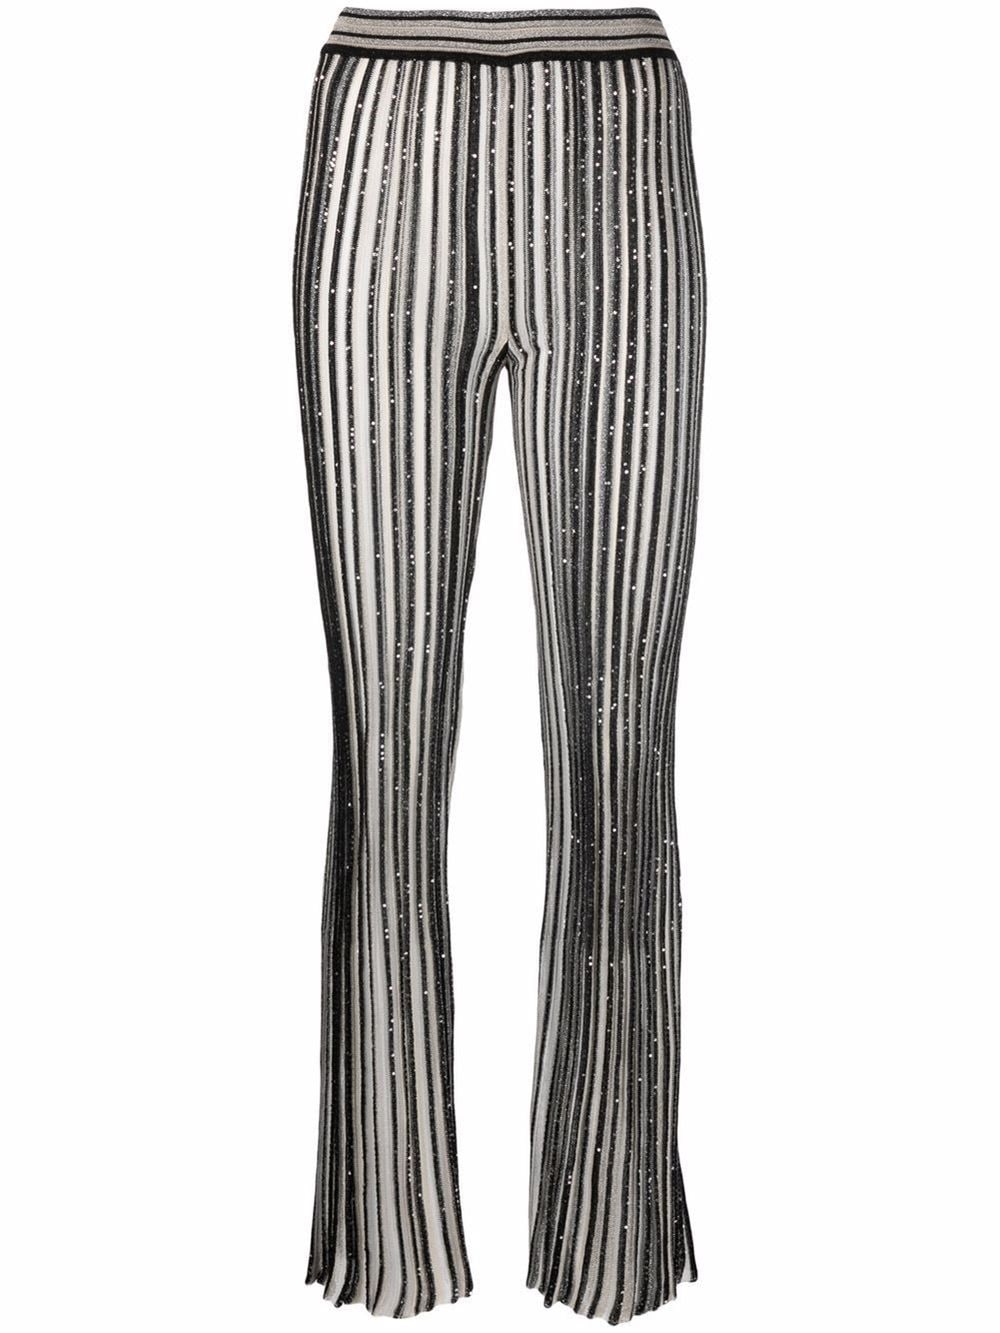 MISSONI Knitted Flared Pants in Black